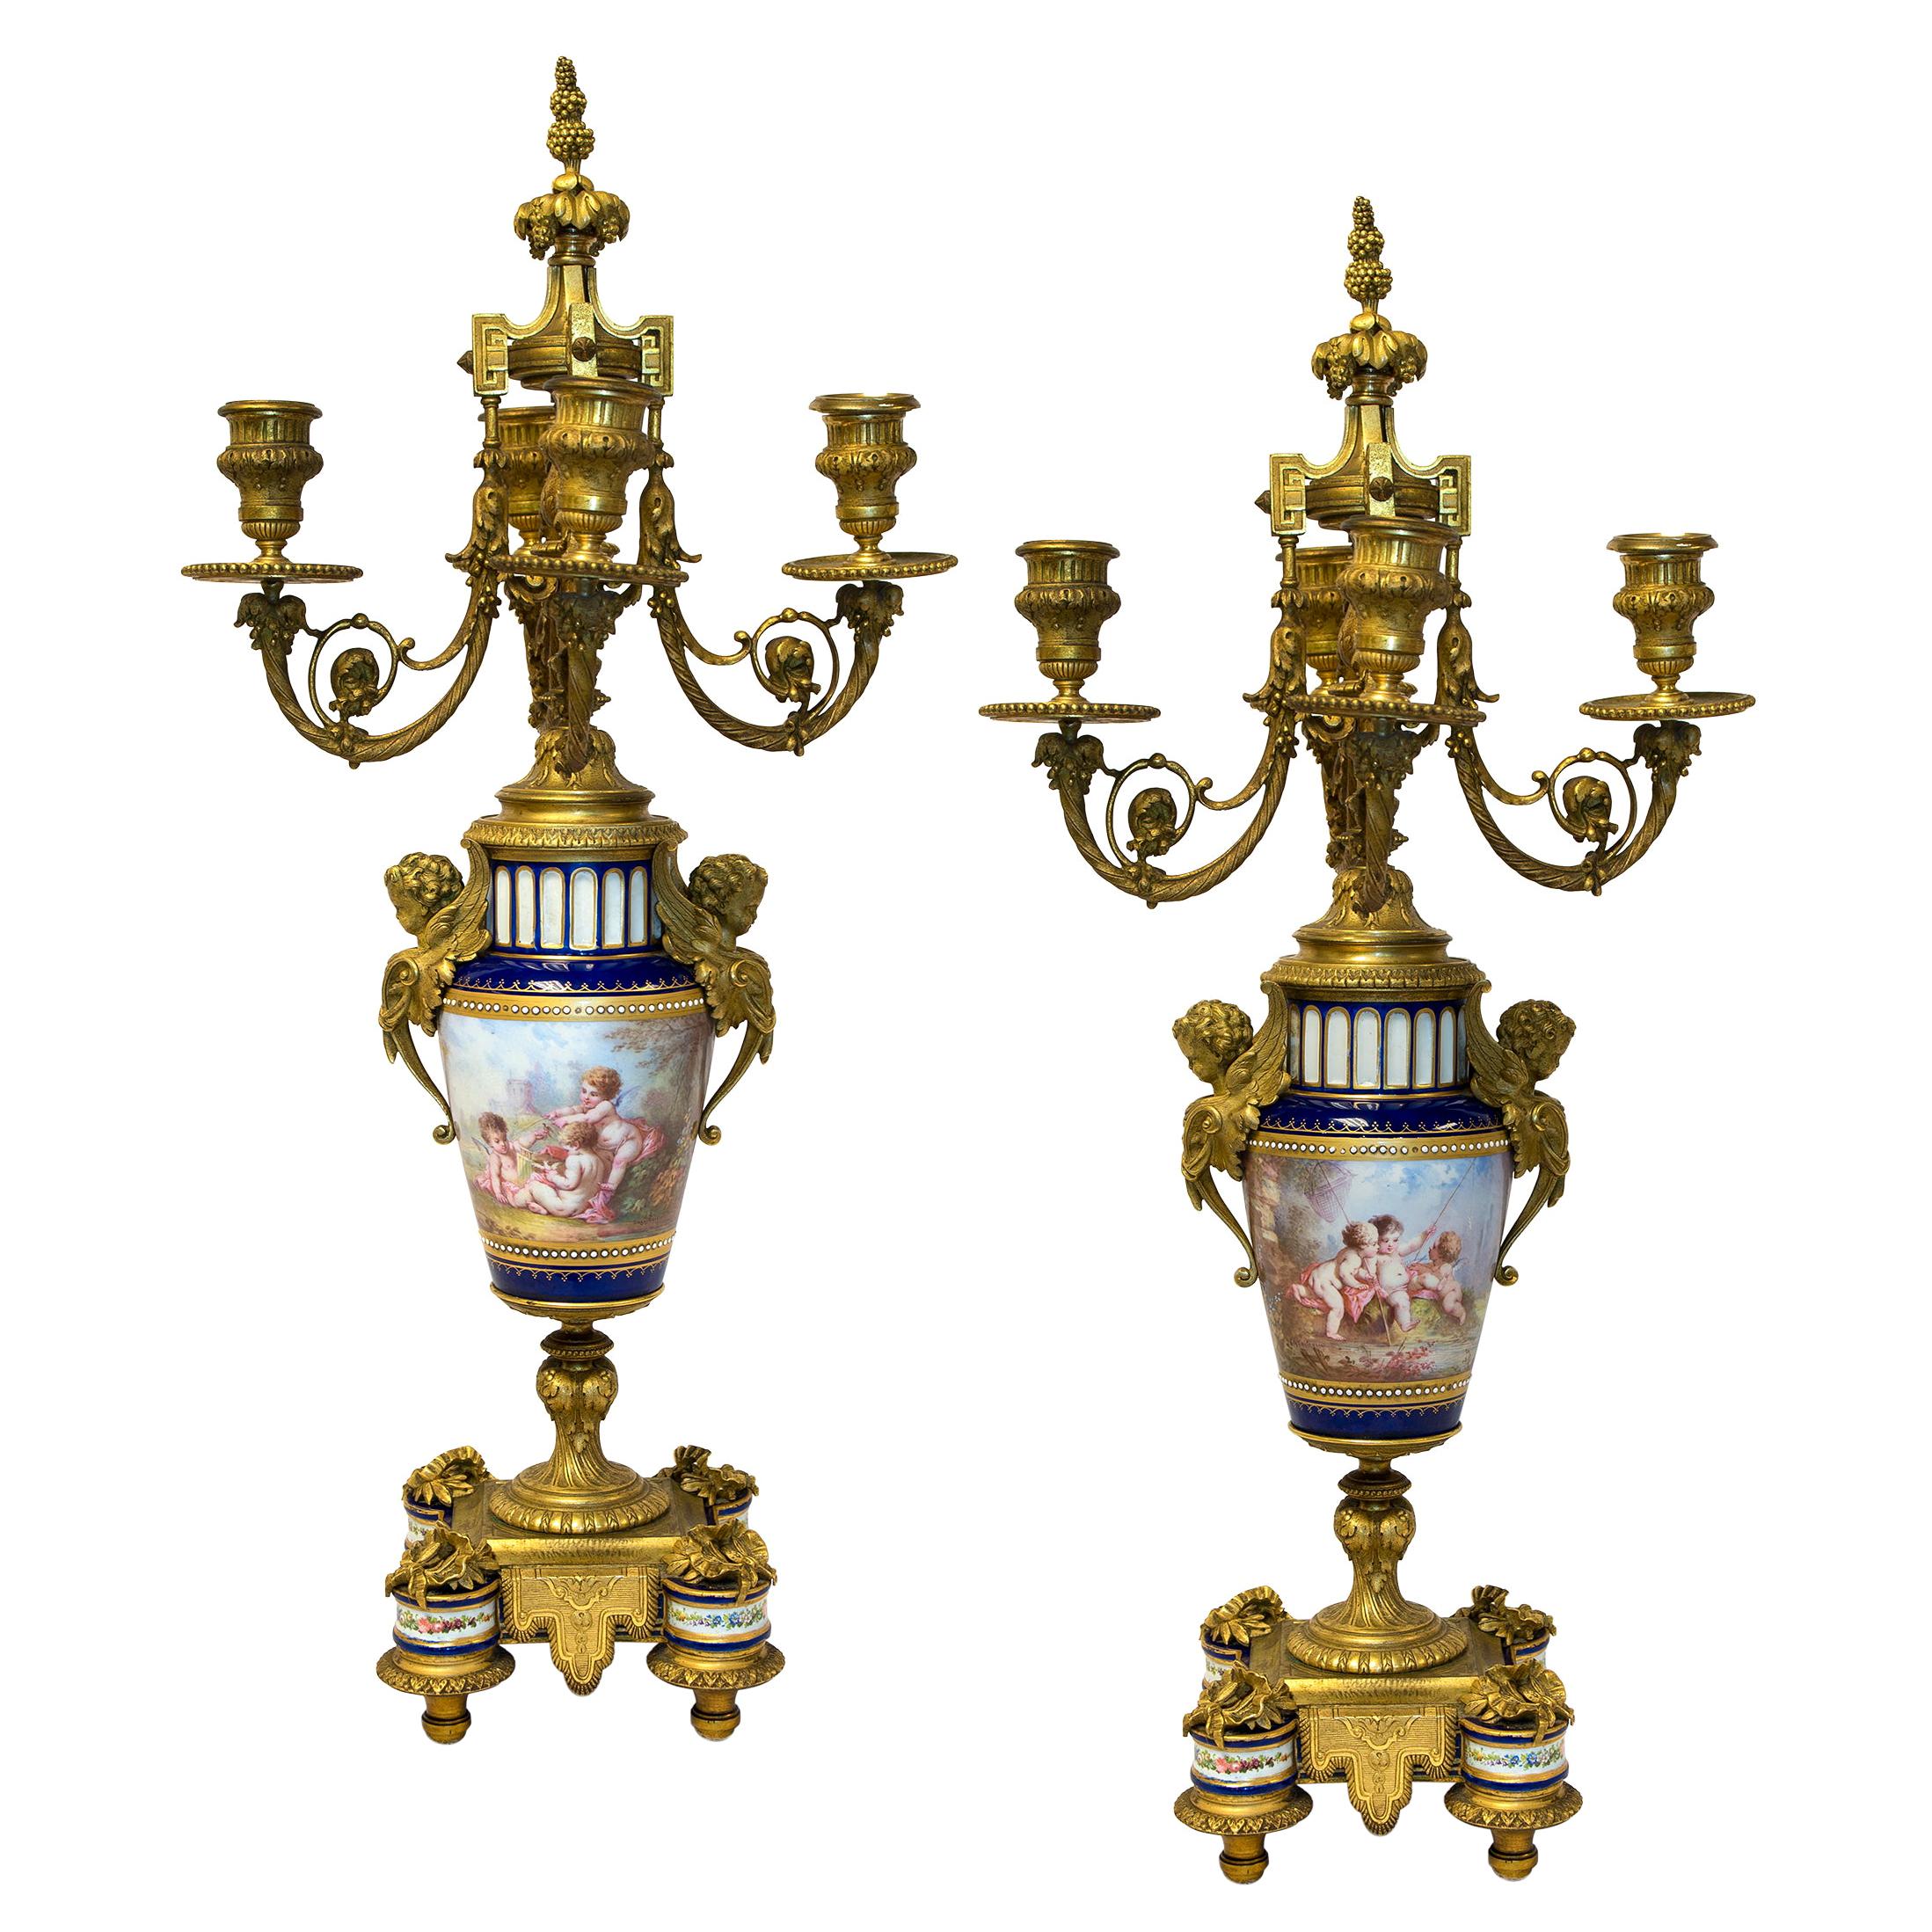 Rare Pair of Four-Branch Gilt Bronze & Jeweled Sèvres Style Porcelain Candelabra For Sale